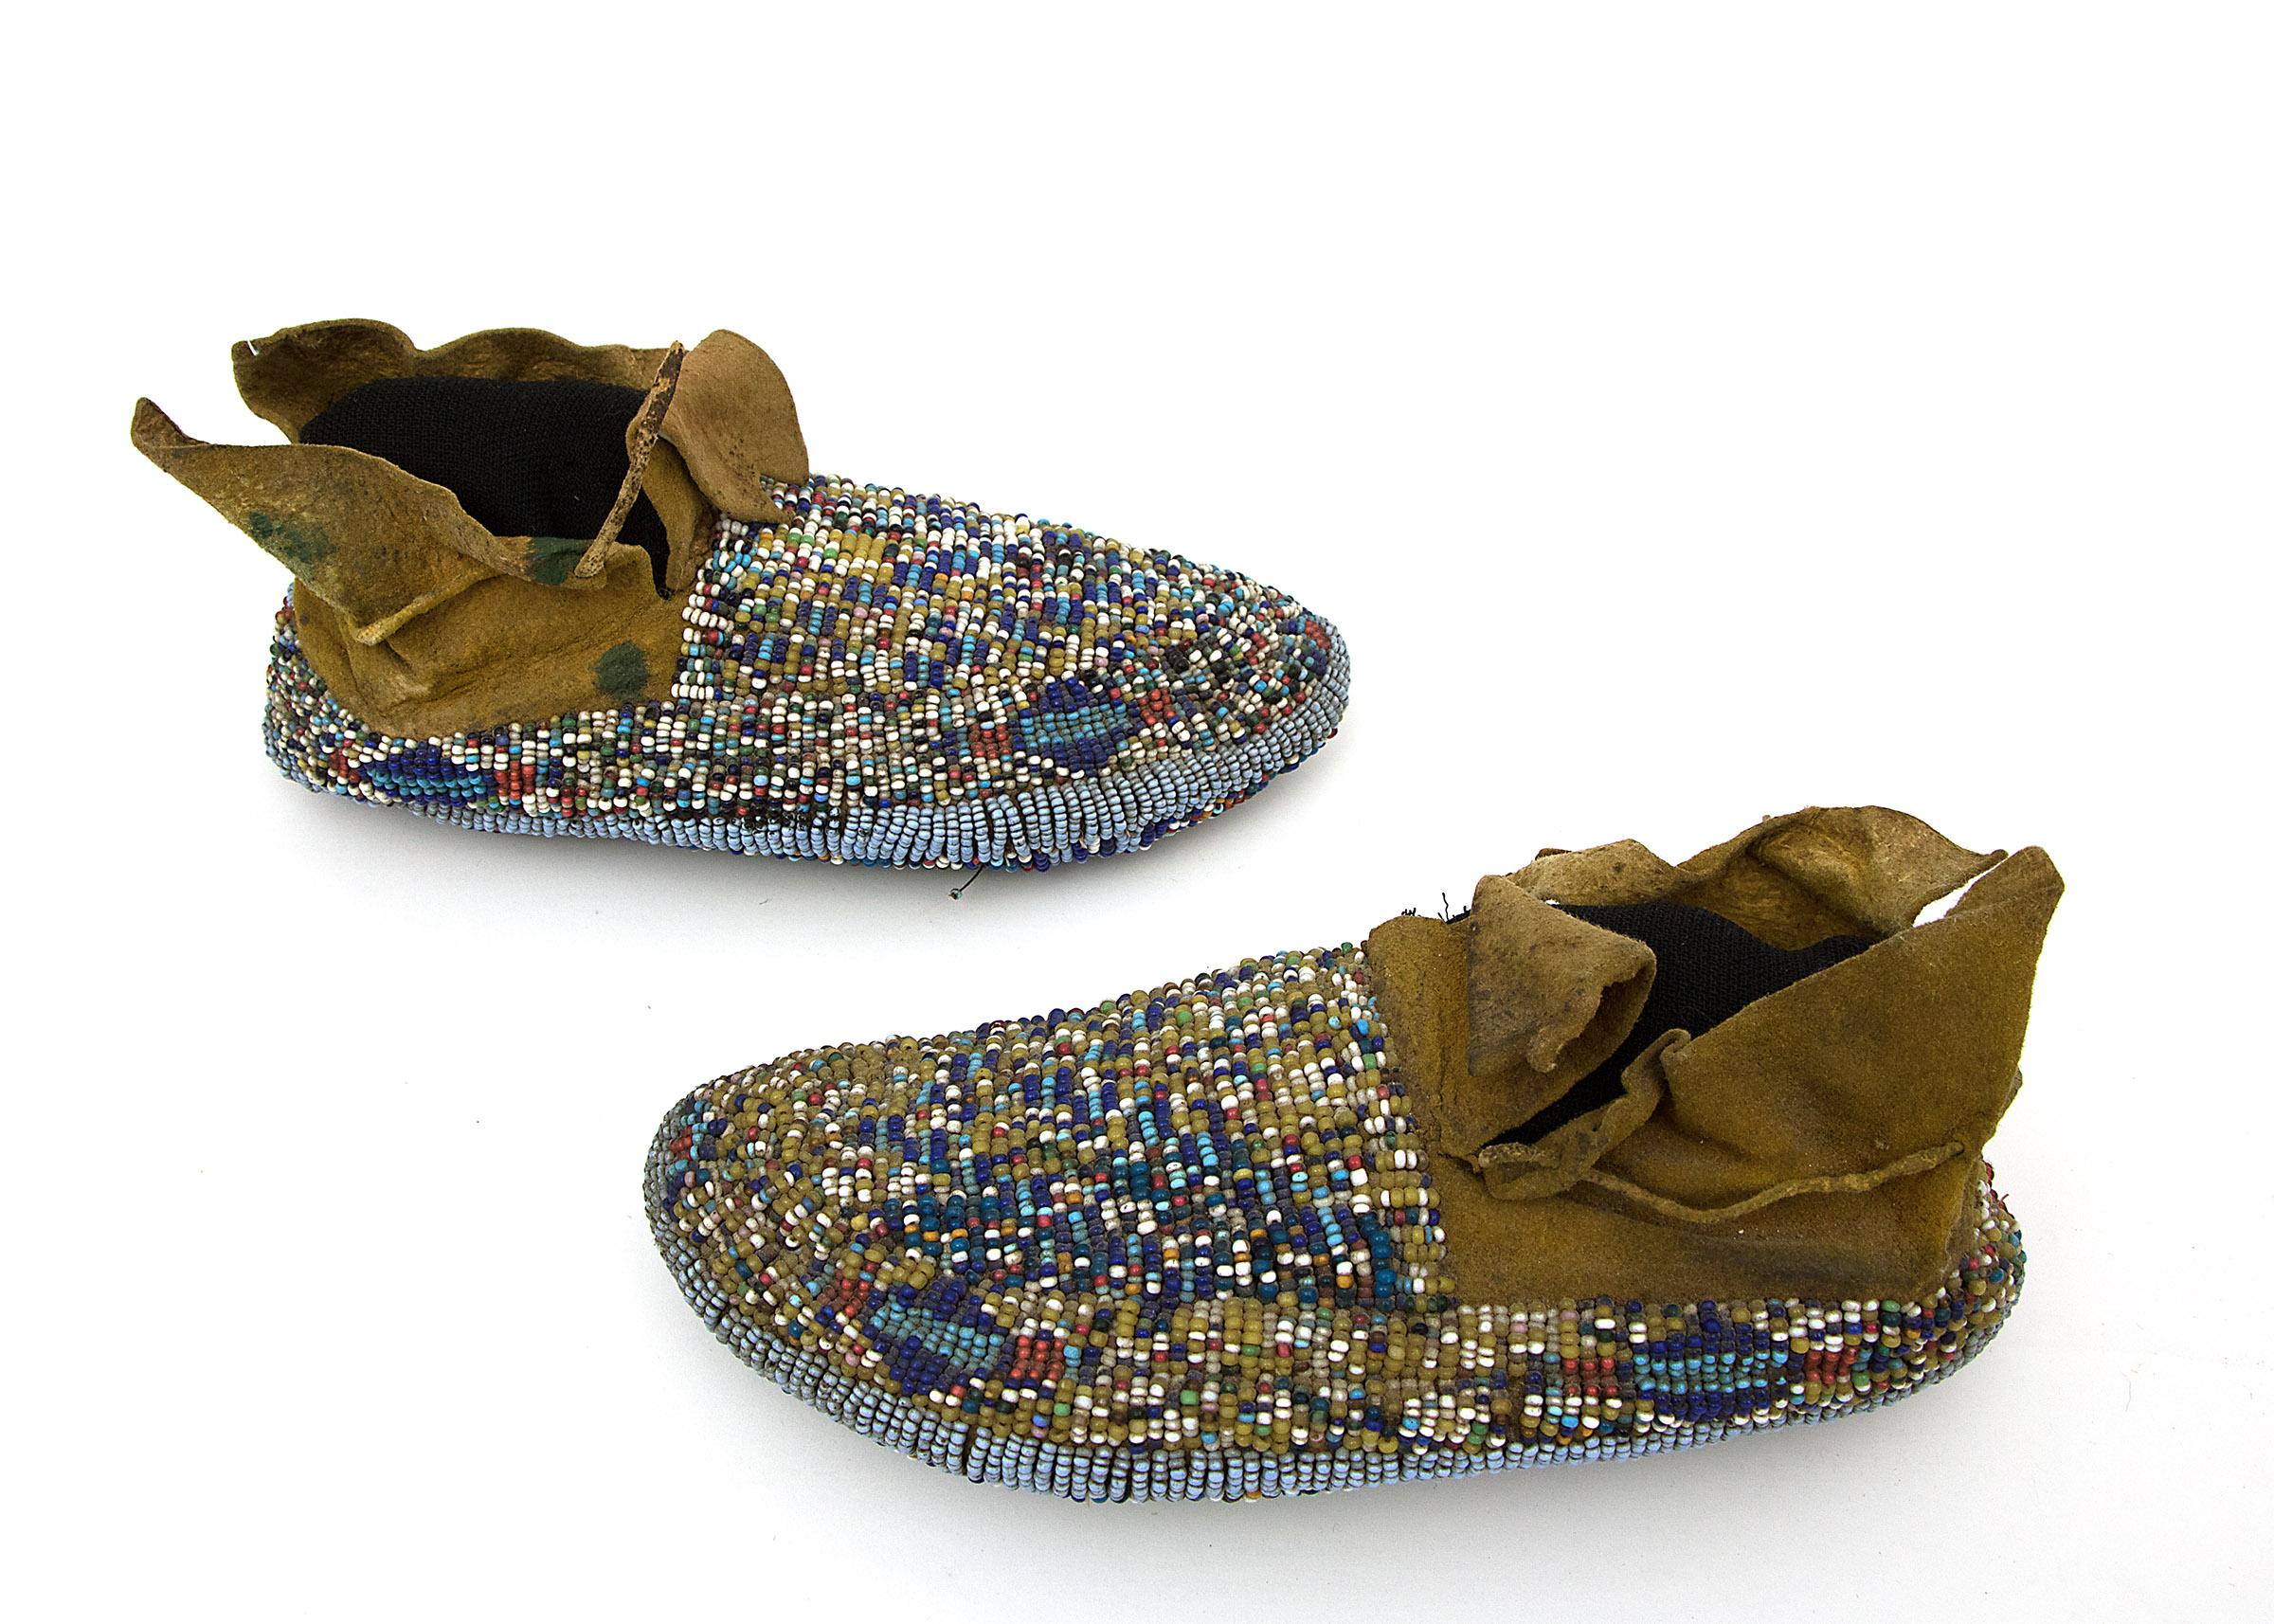 19th Century Antique Native American Childs Ceremonial Beaded Moccasins, Cheyenne, circa 1900